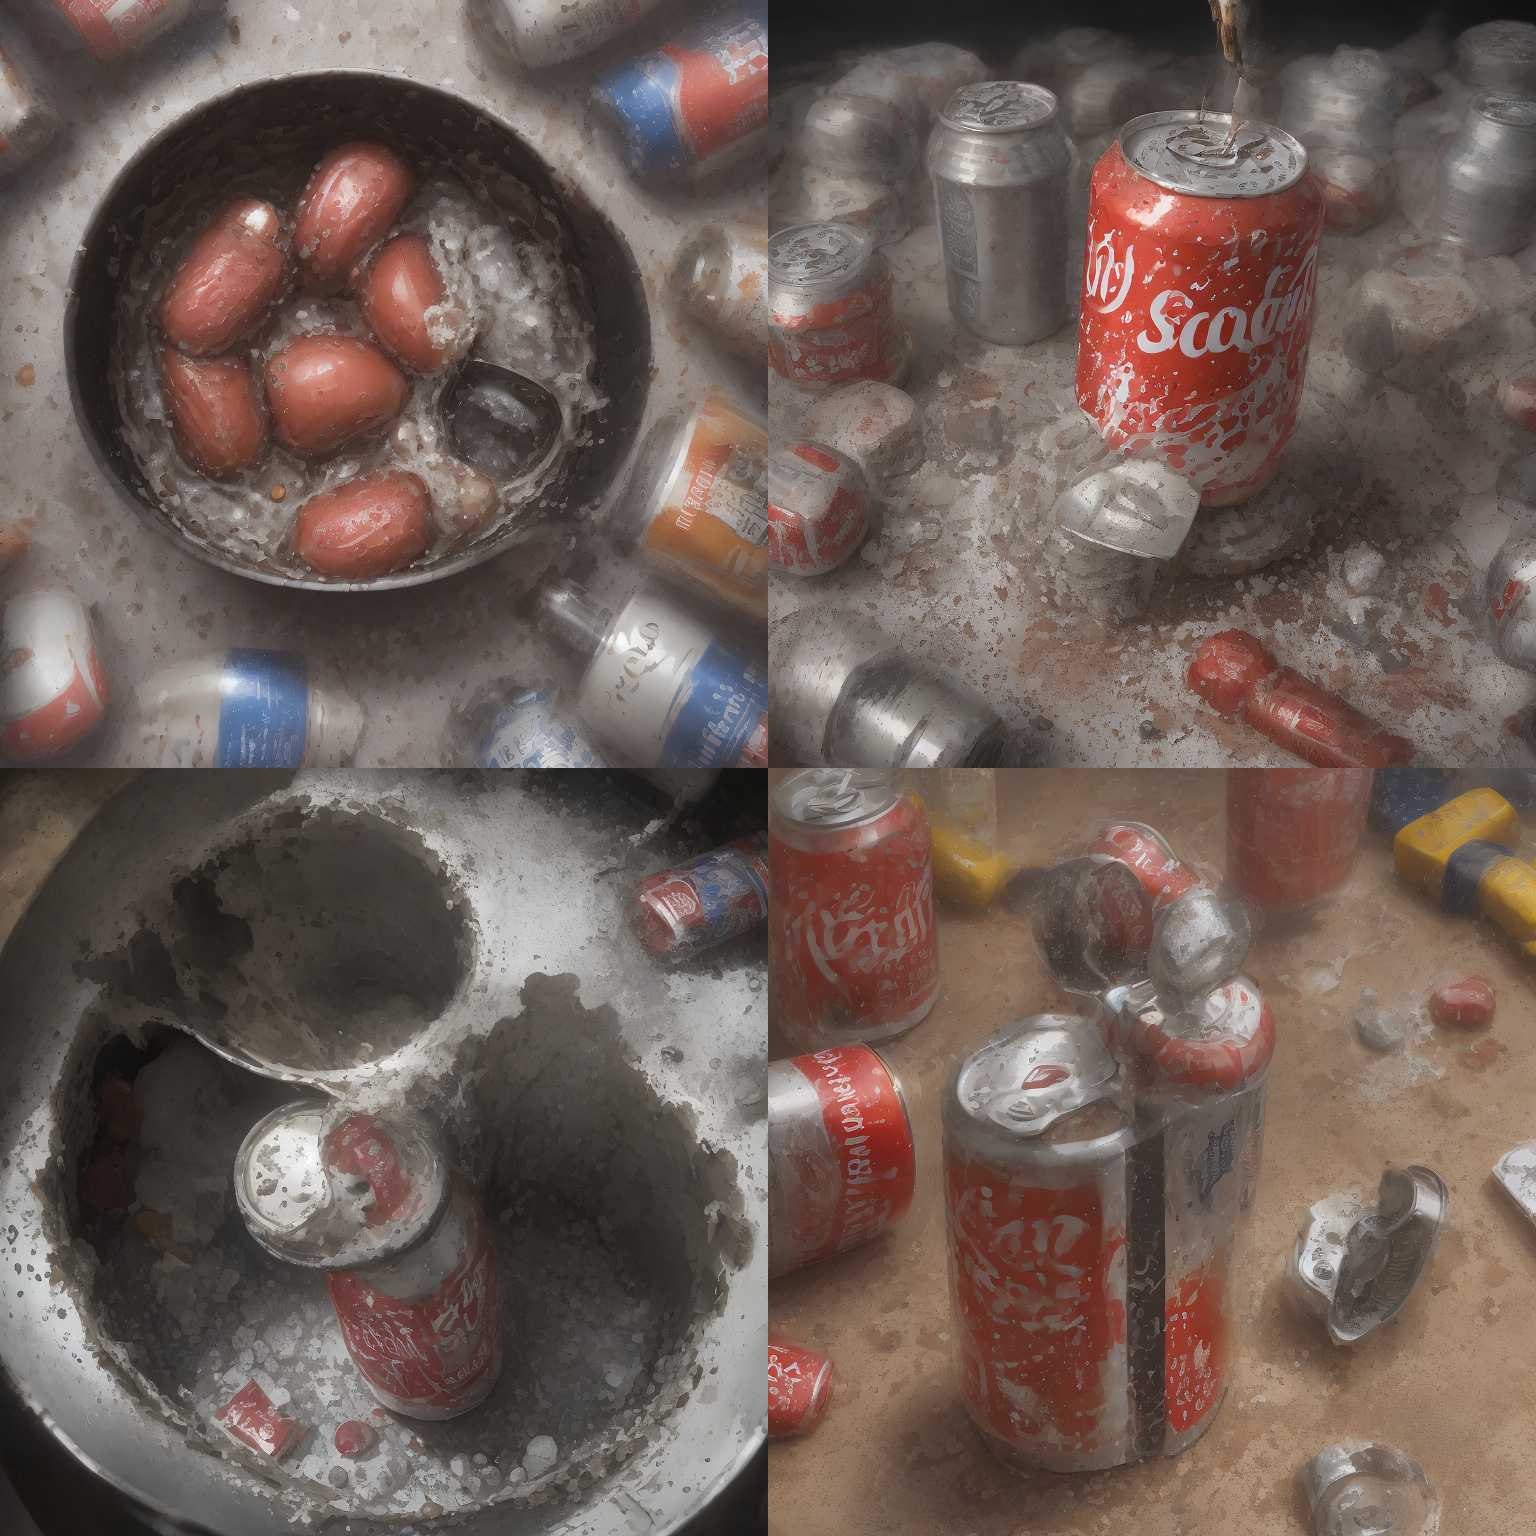 A soda can opened after violently shaken